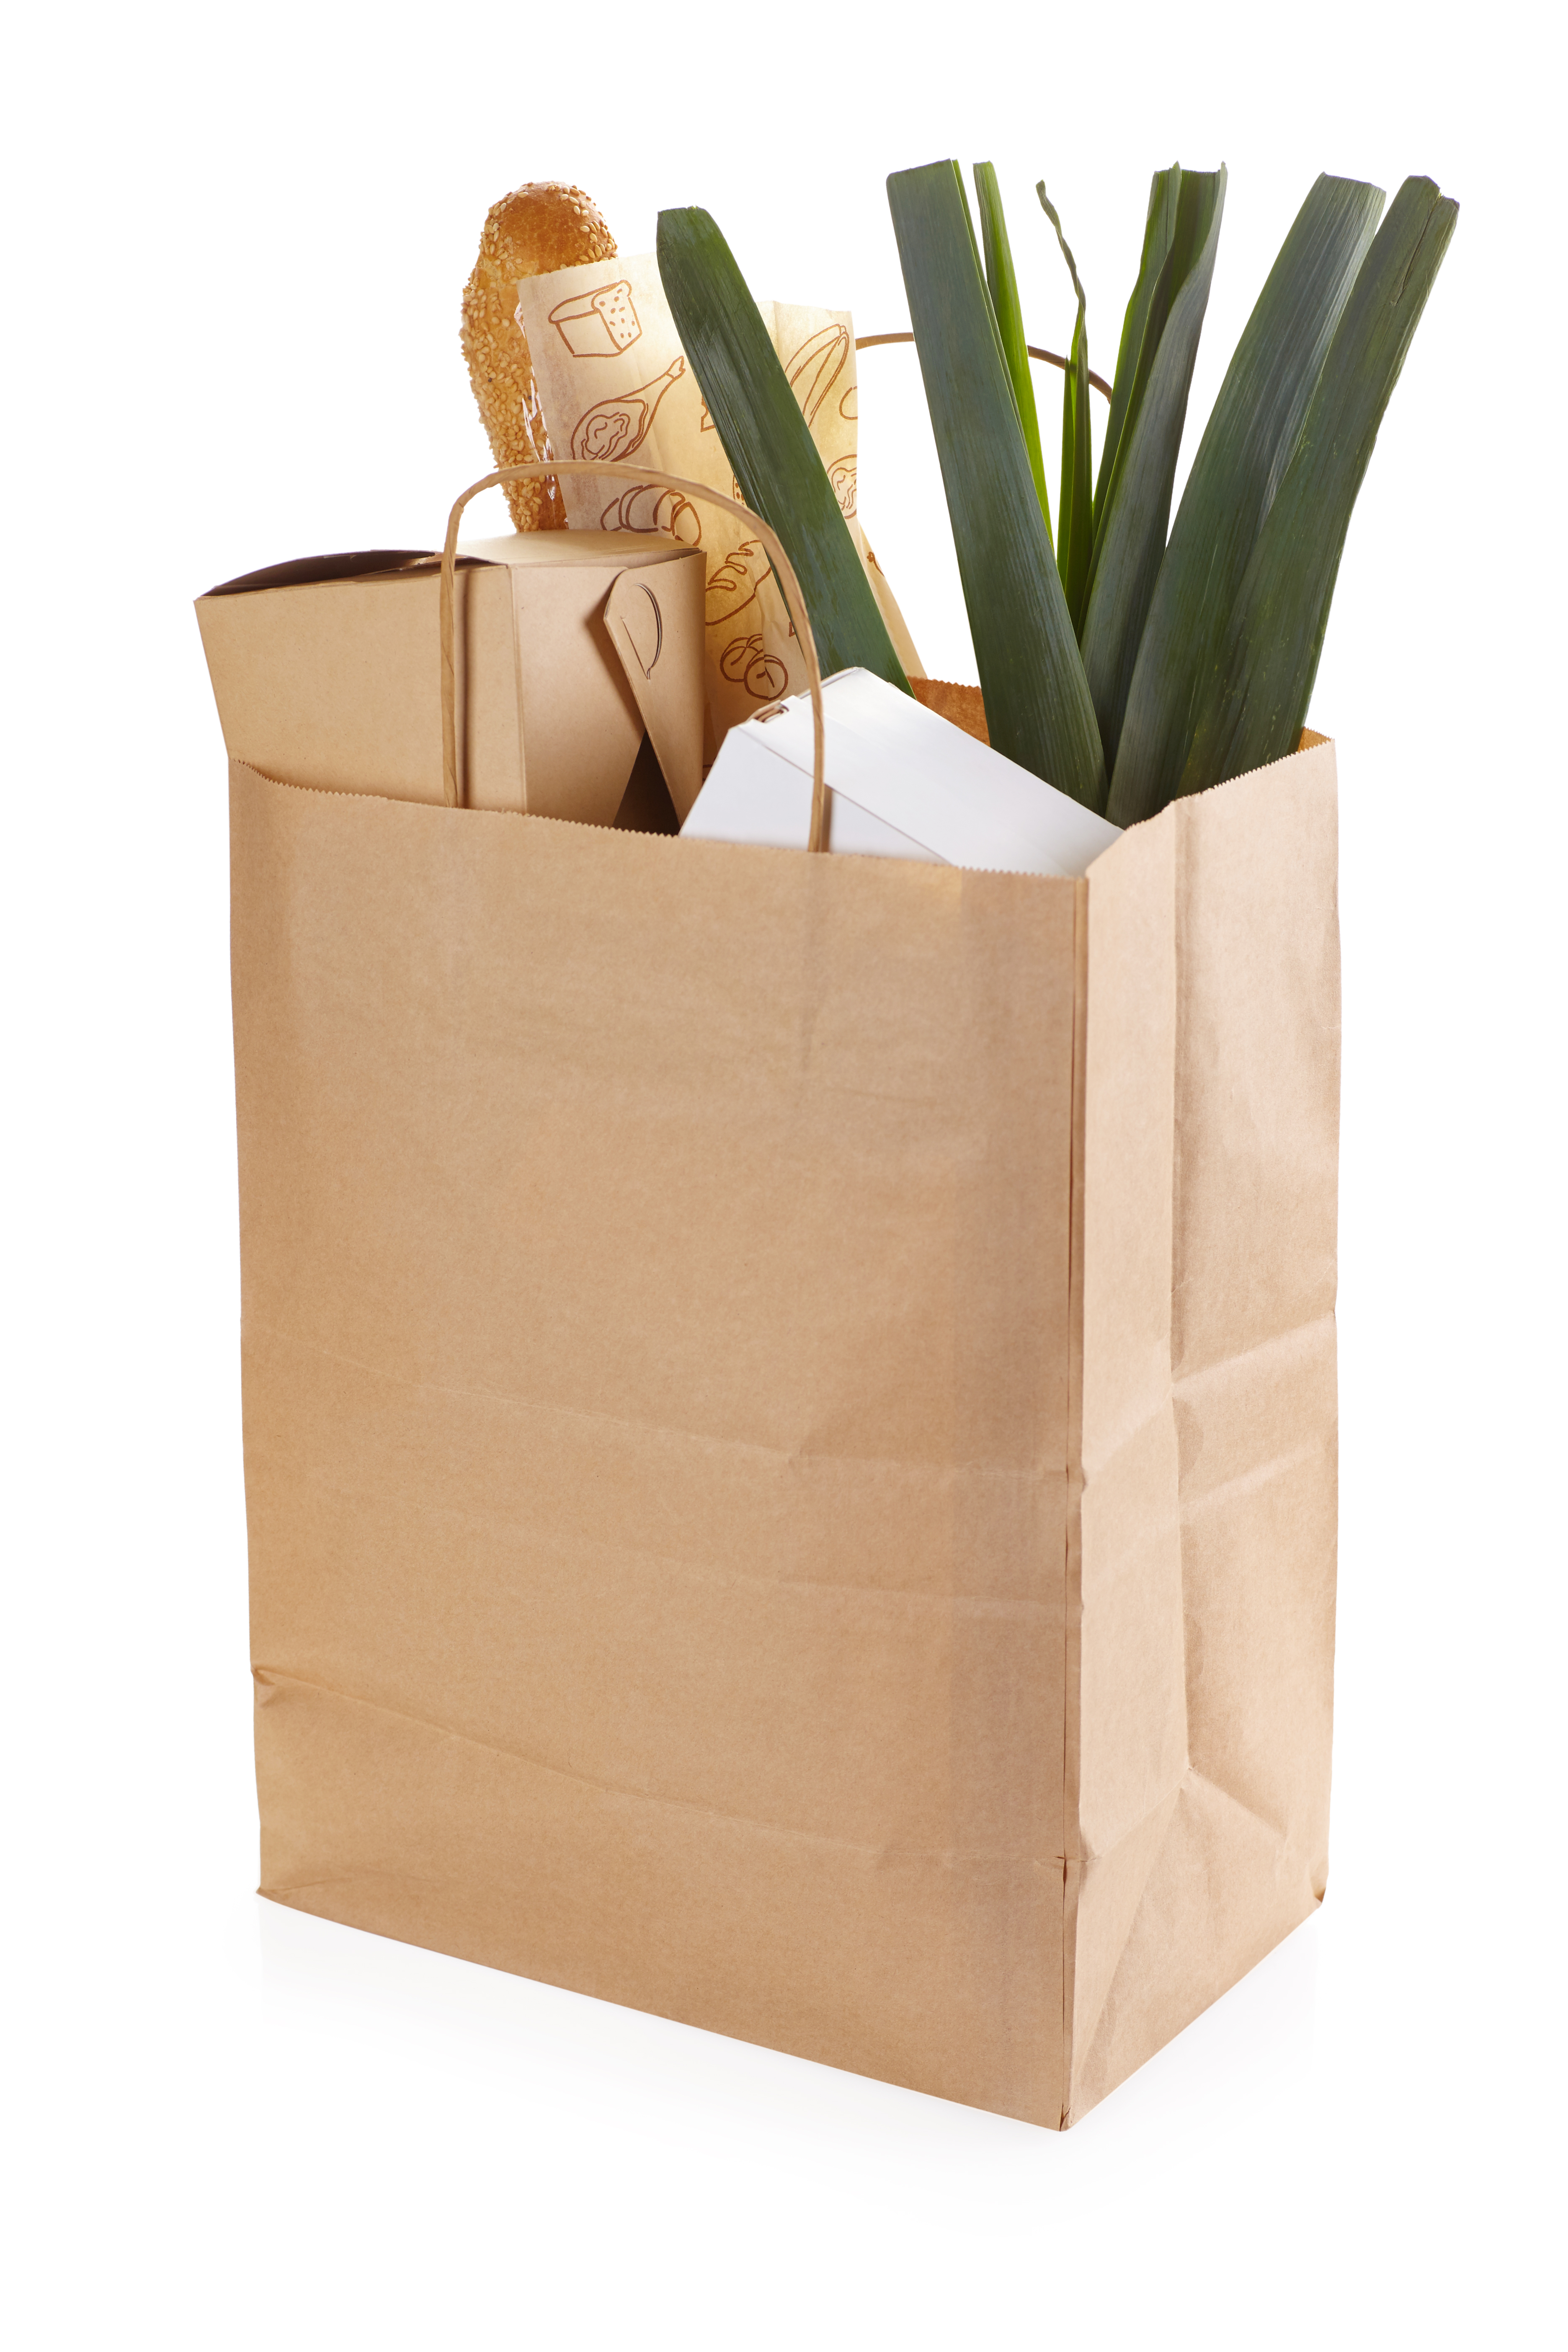 OSQ CarrBag tw 240 paper bags with handles